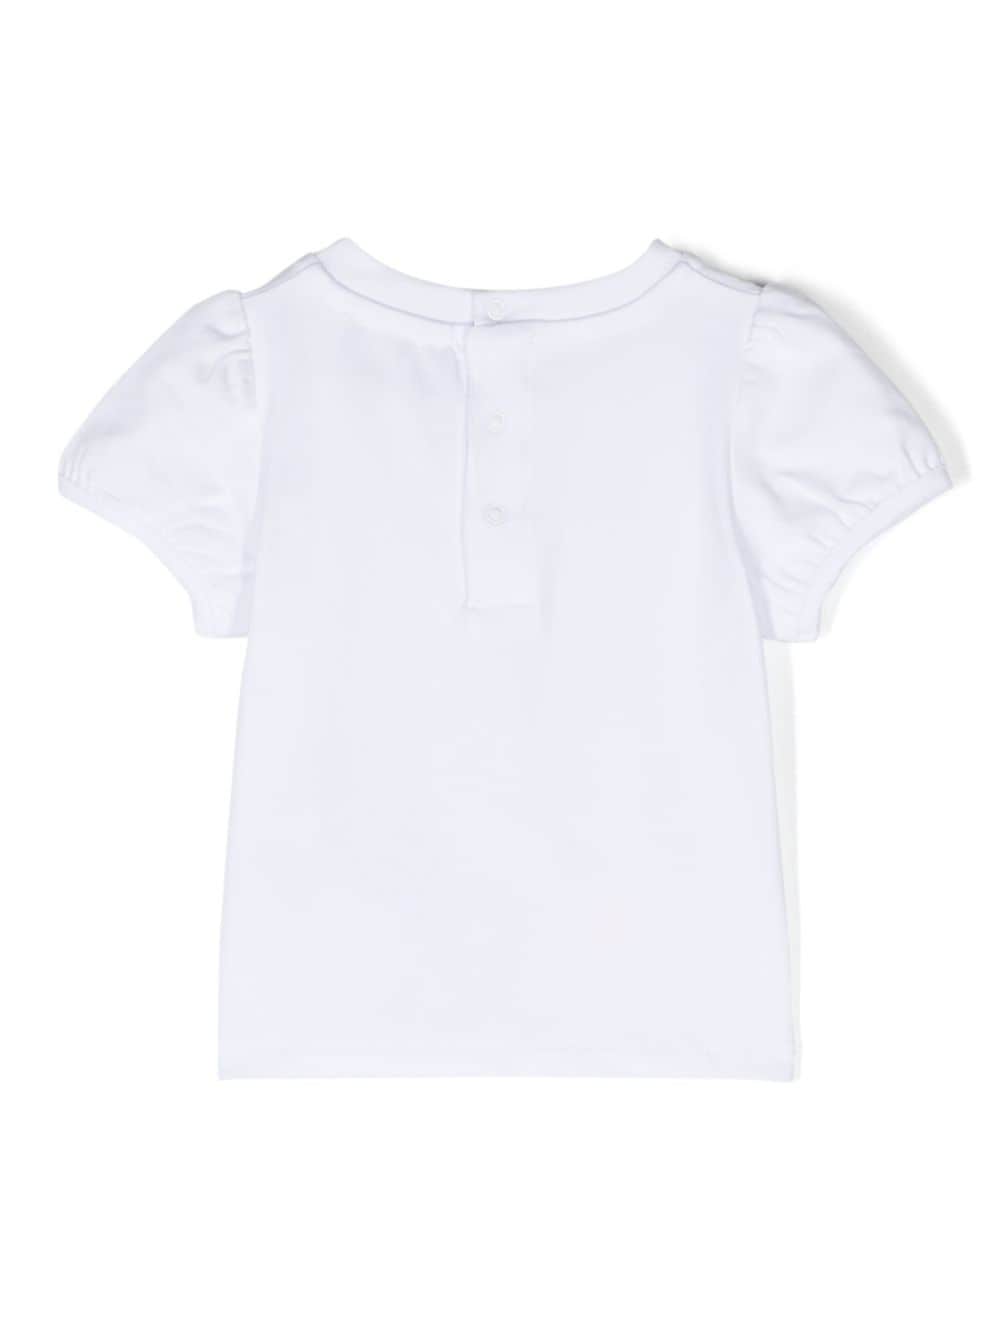 White baby girl t-shirt with bear